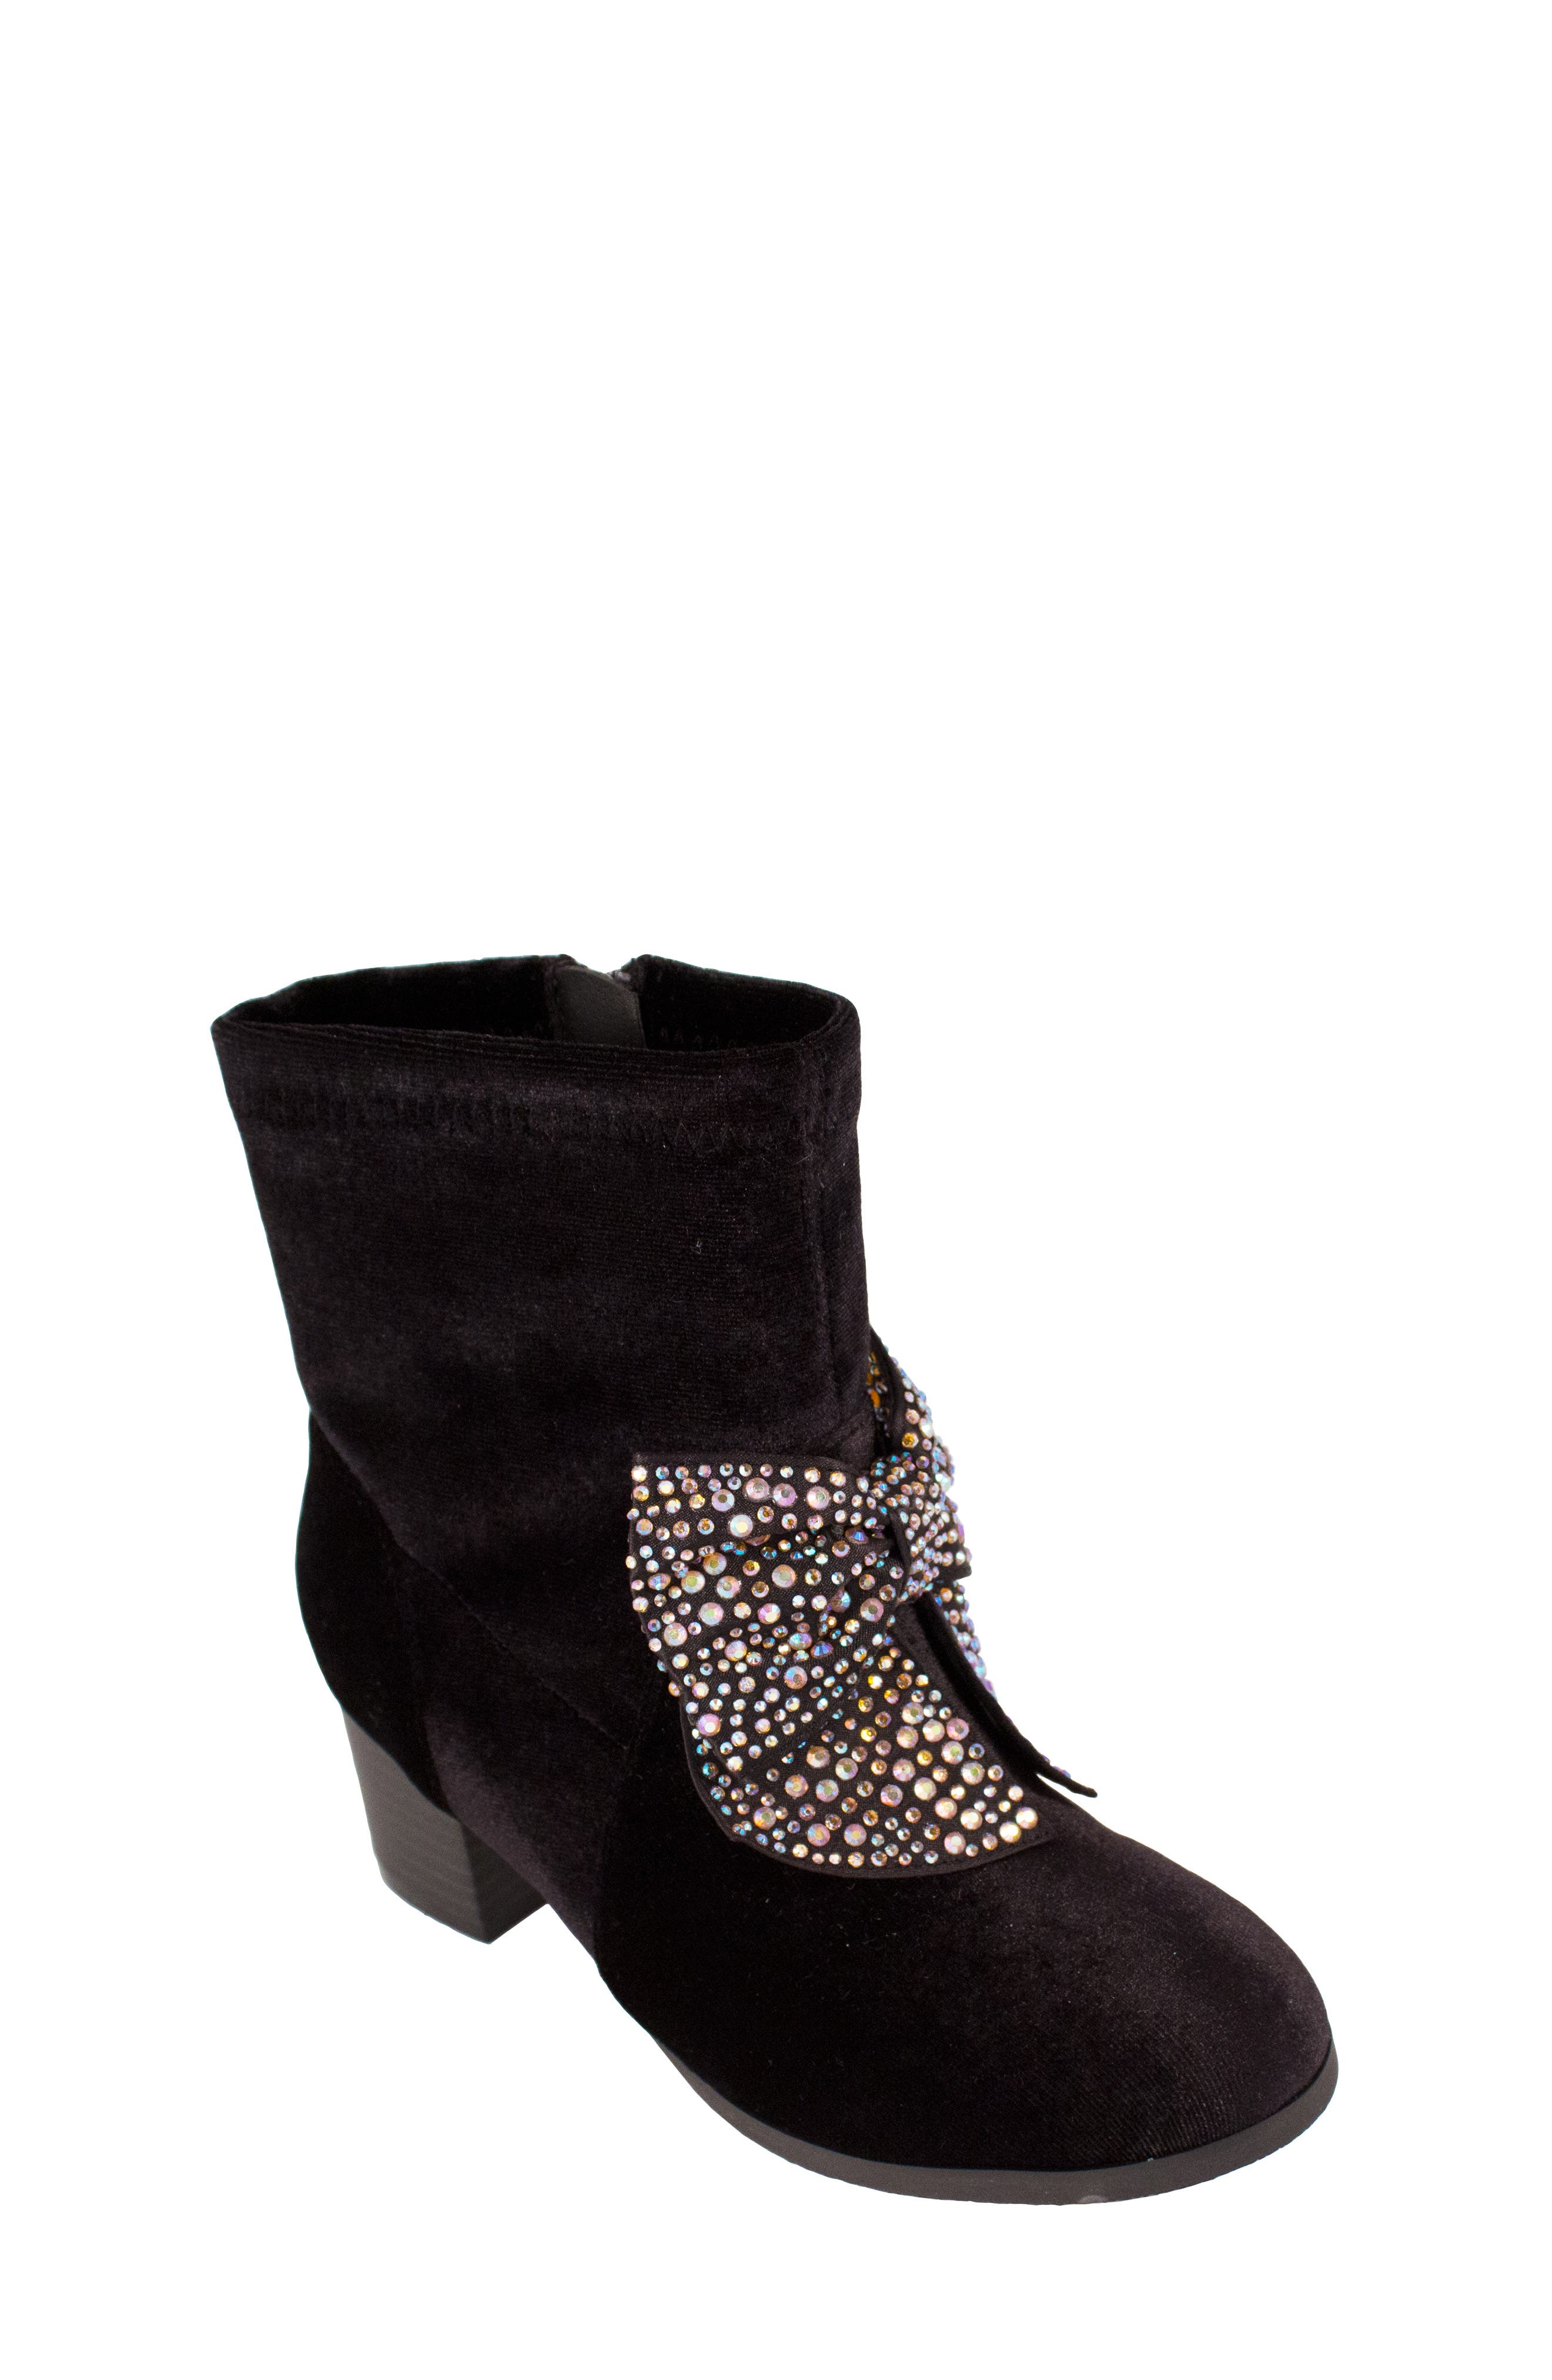 jessica simpson crystal boots